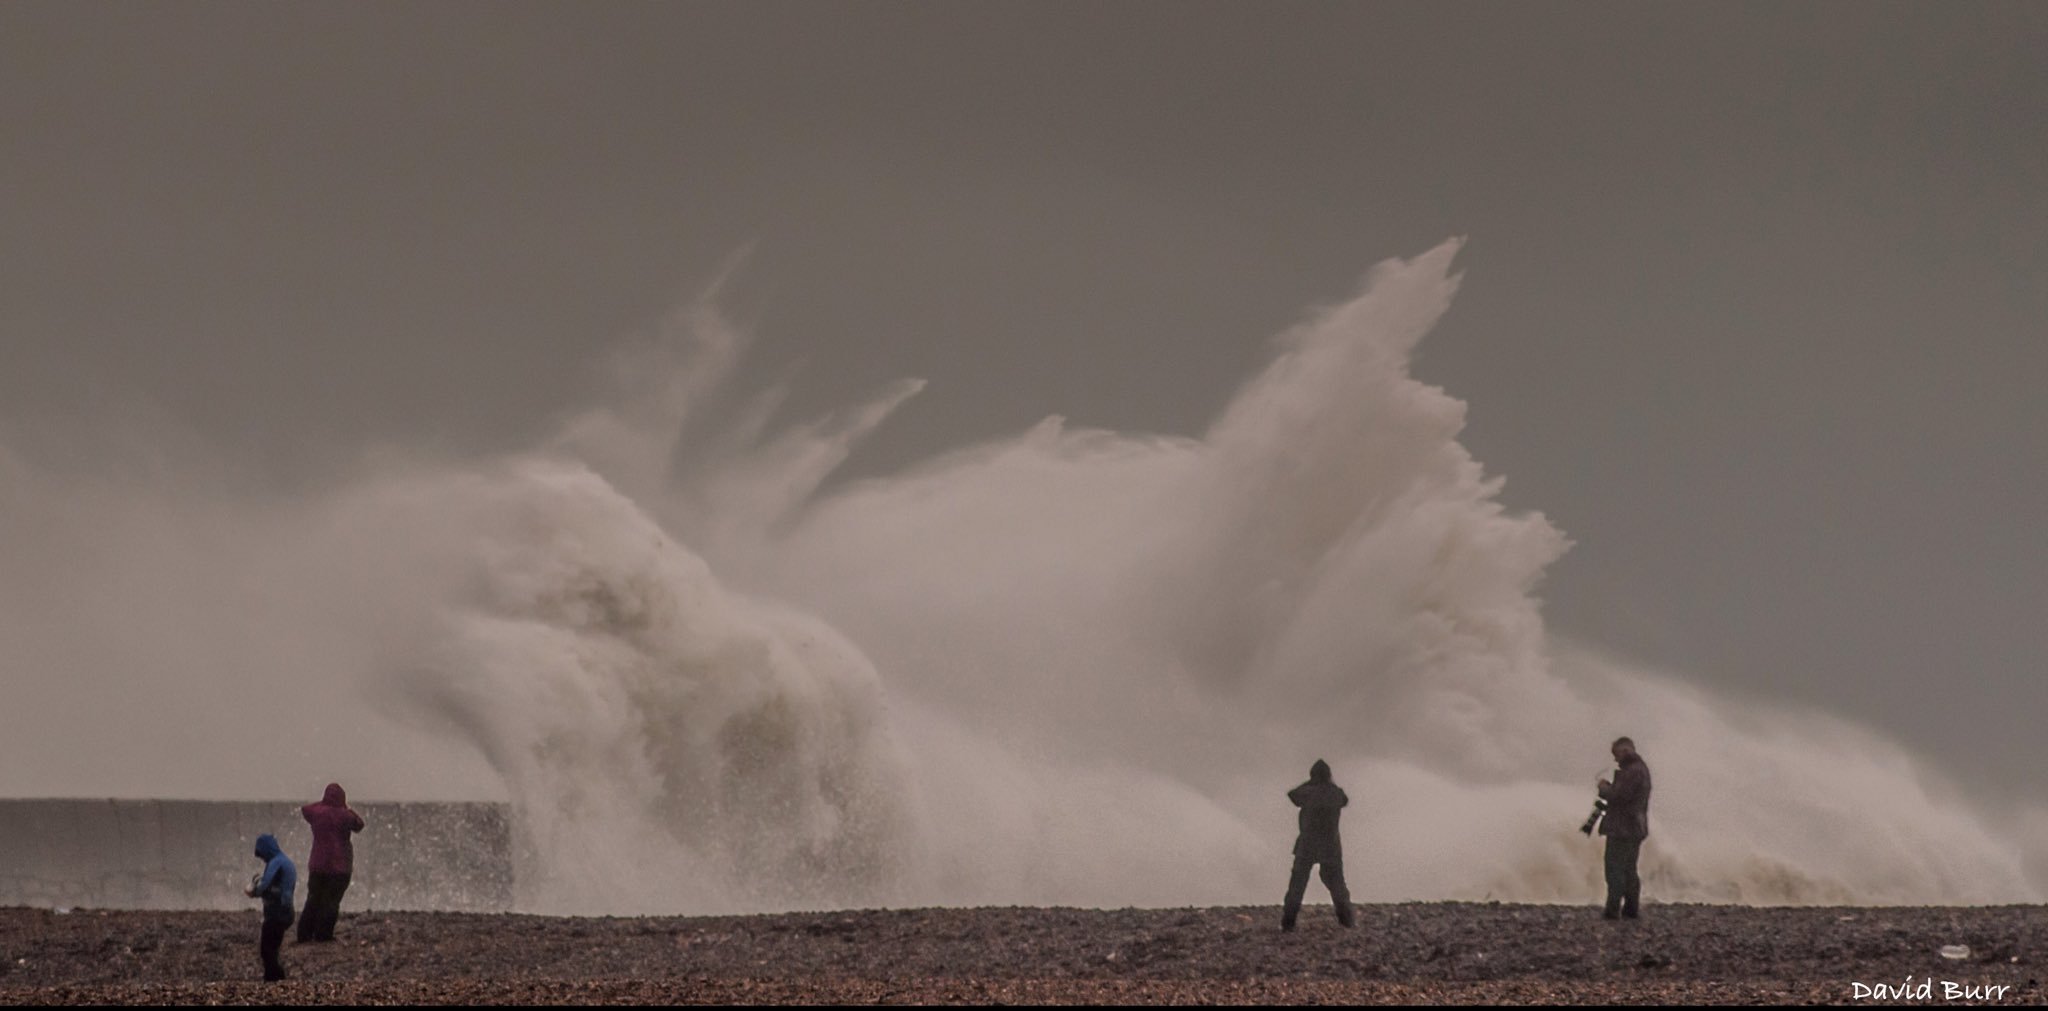 Gales at Newhaven, East Sussex, UK by David George Burr @Bur1Burr